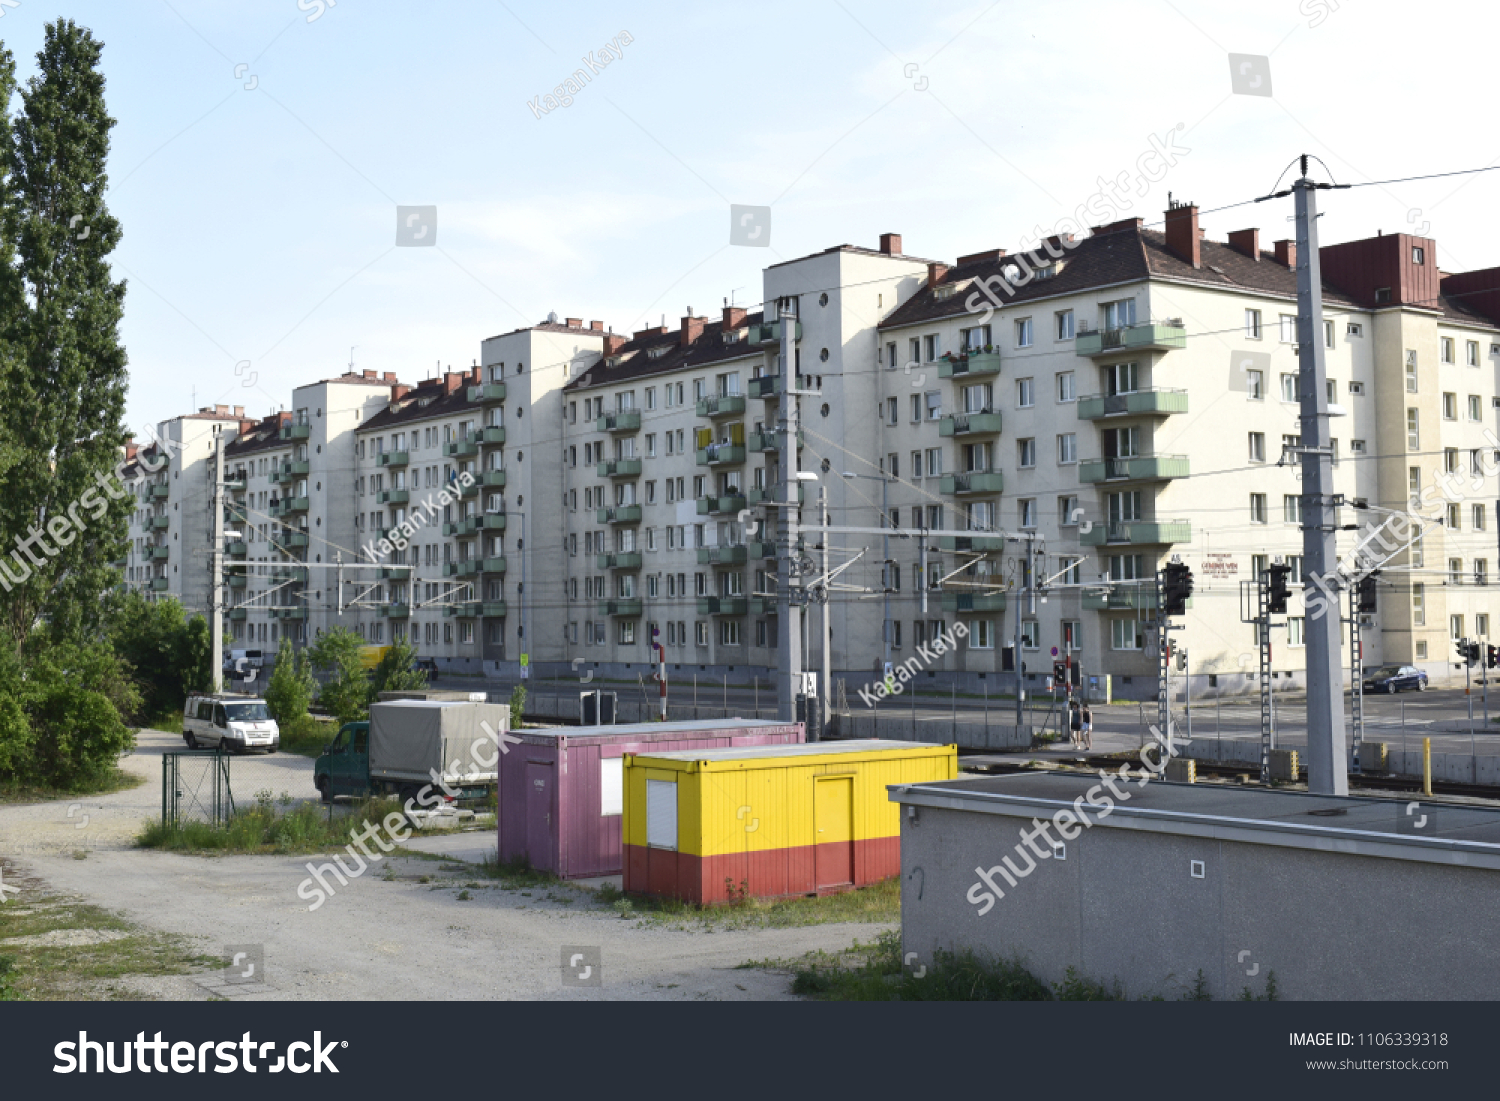 VIENNA, AUSTRIA - MAY 31, 2018: Old social housing blocks in the 2nd district (Leopoldstadt) of Vienna #1106339318